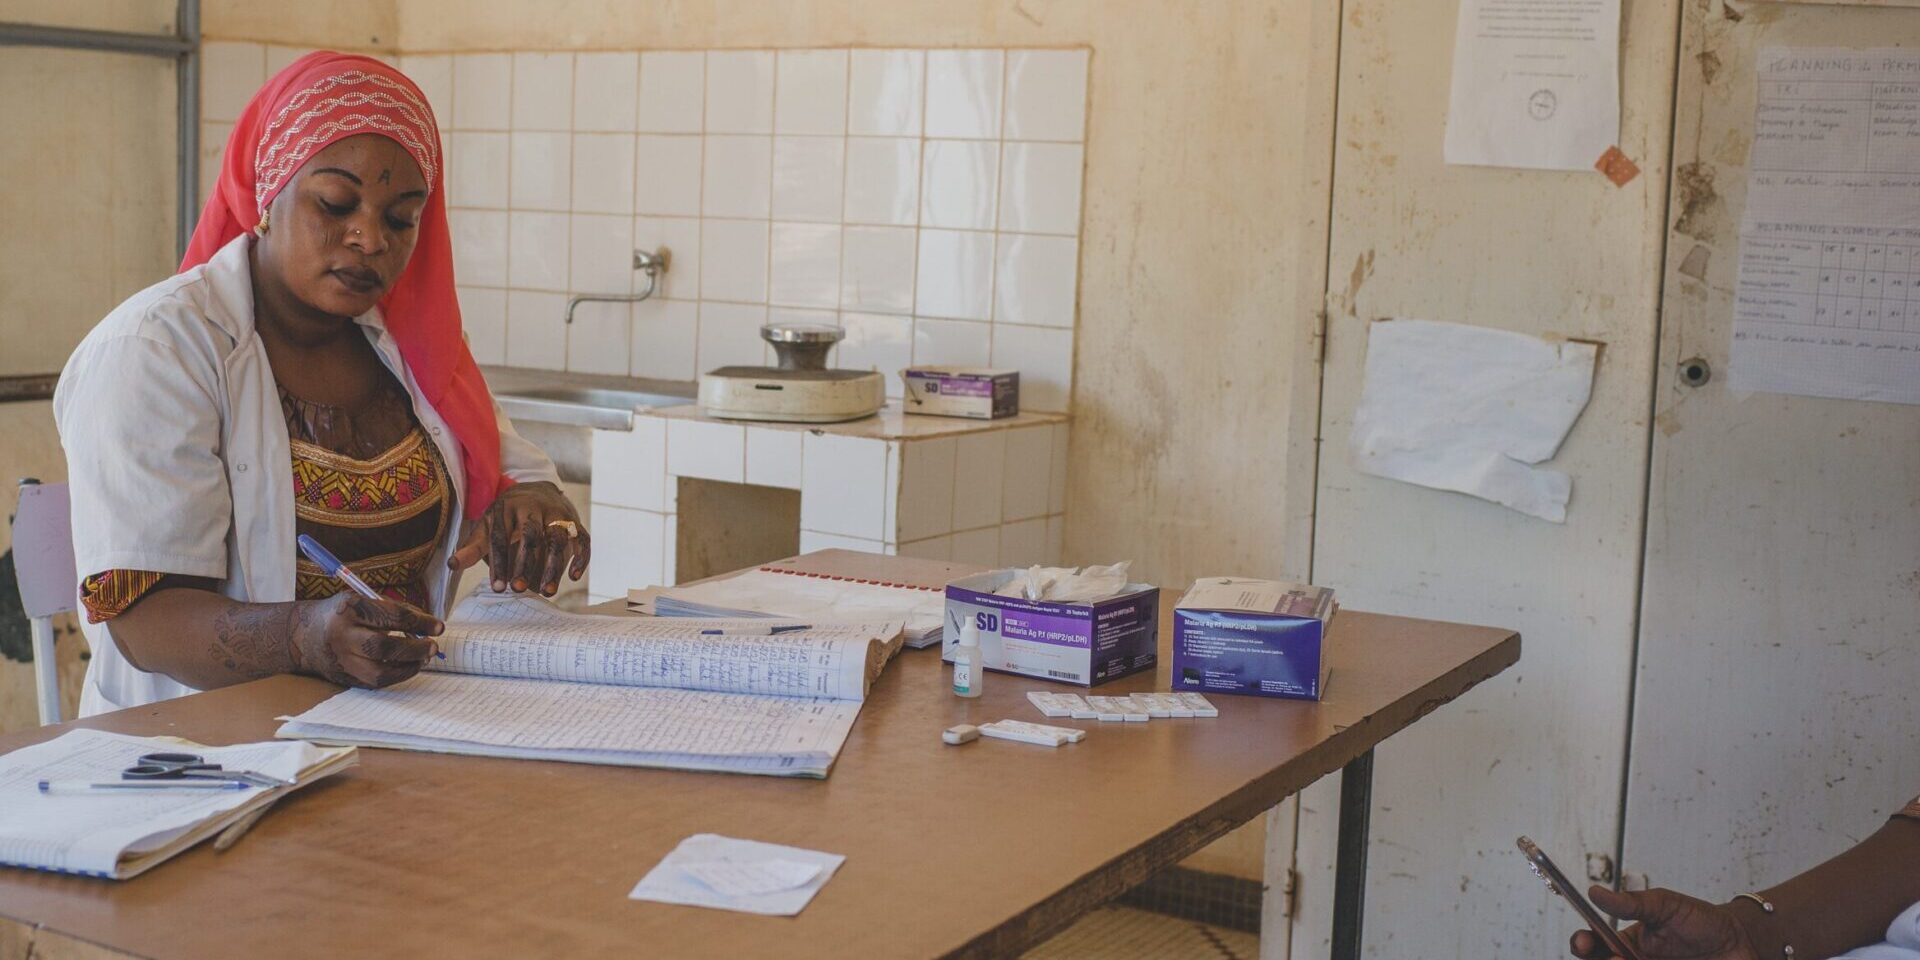 A female health worker sitting at a table, doing paperwork.